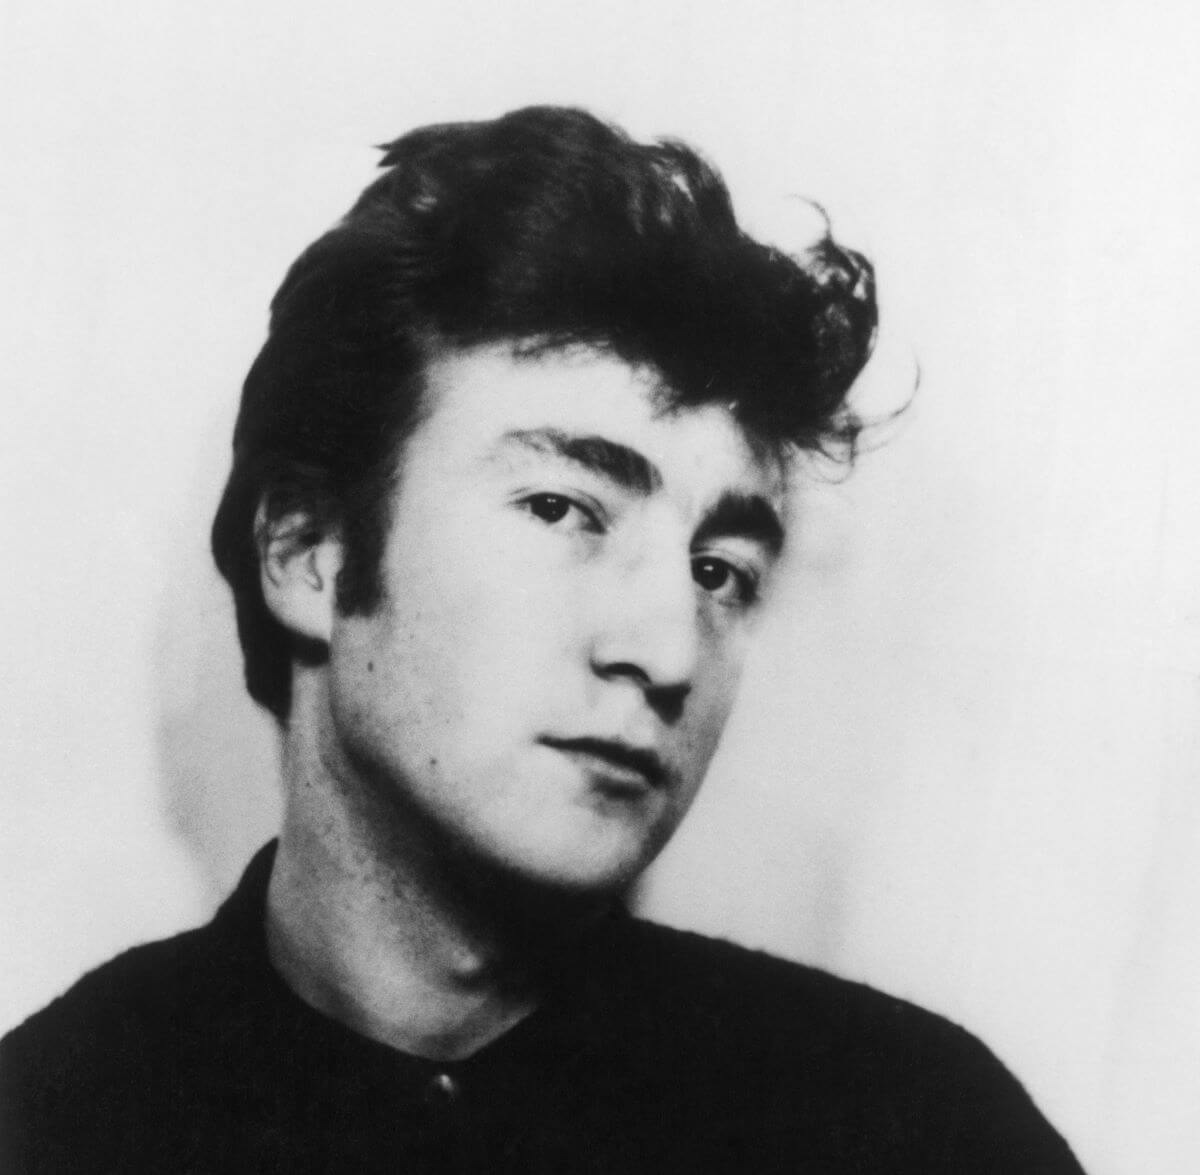 A black and white picture of John Lennon looking at the camera and holding his head at an angle.